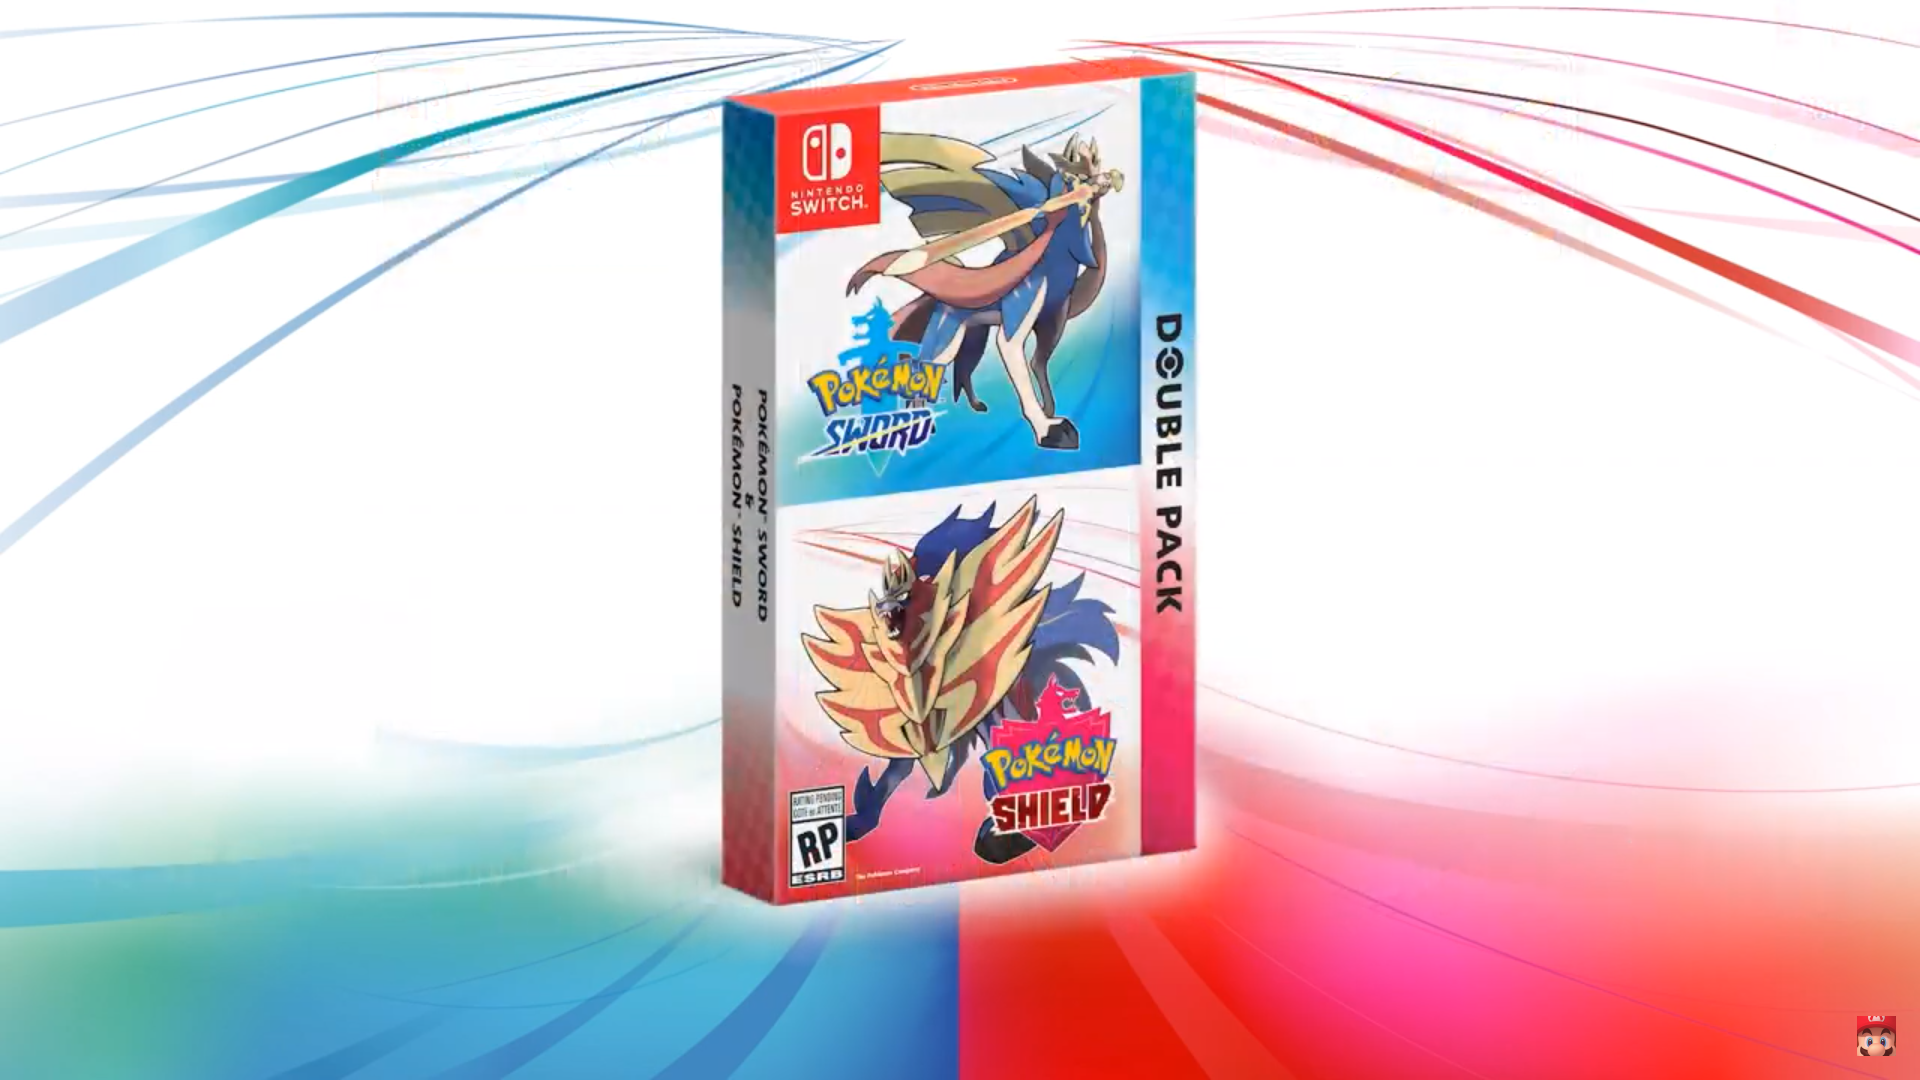 Pre-Order Pokemon Sword and Shield Double Pack from Amazon